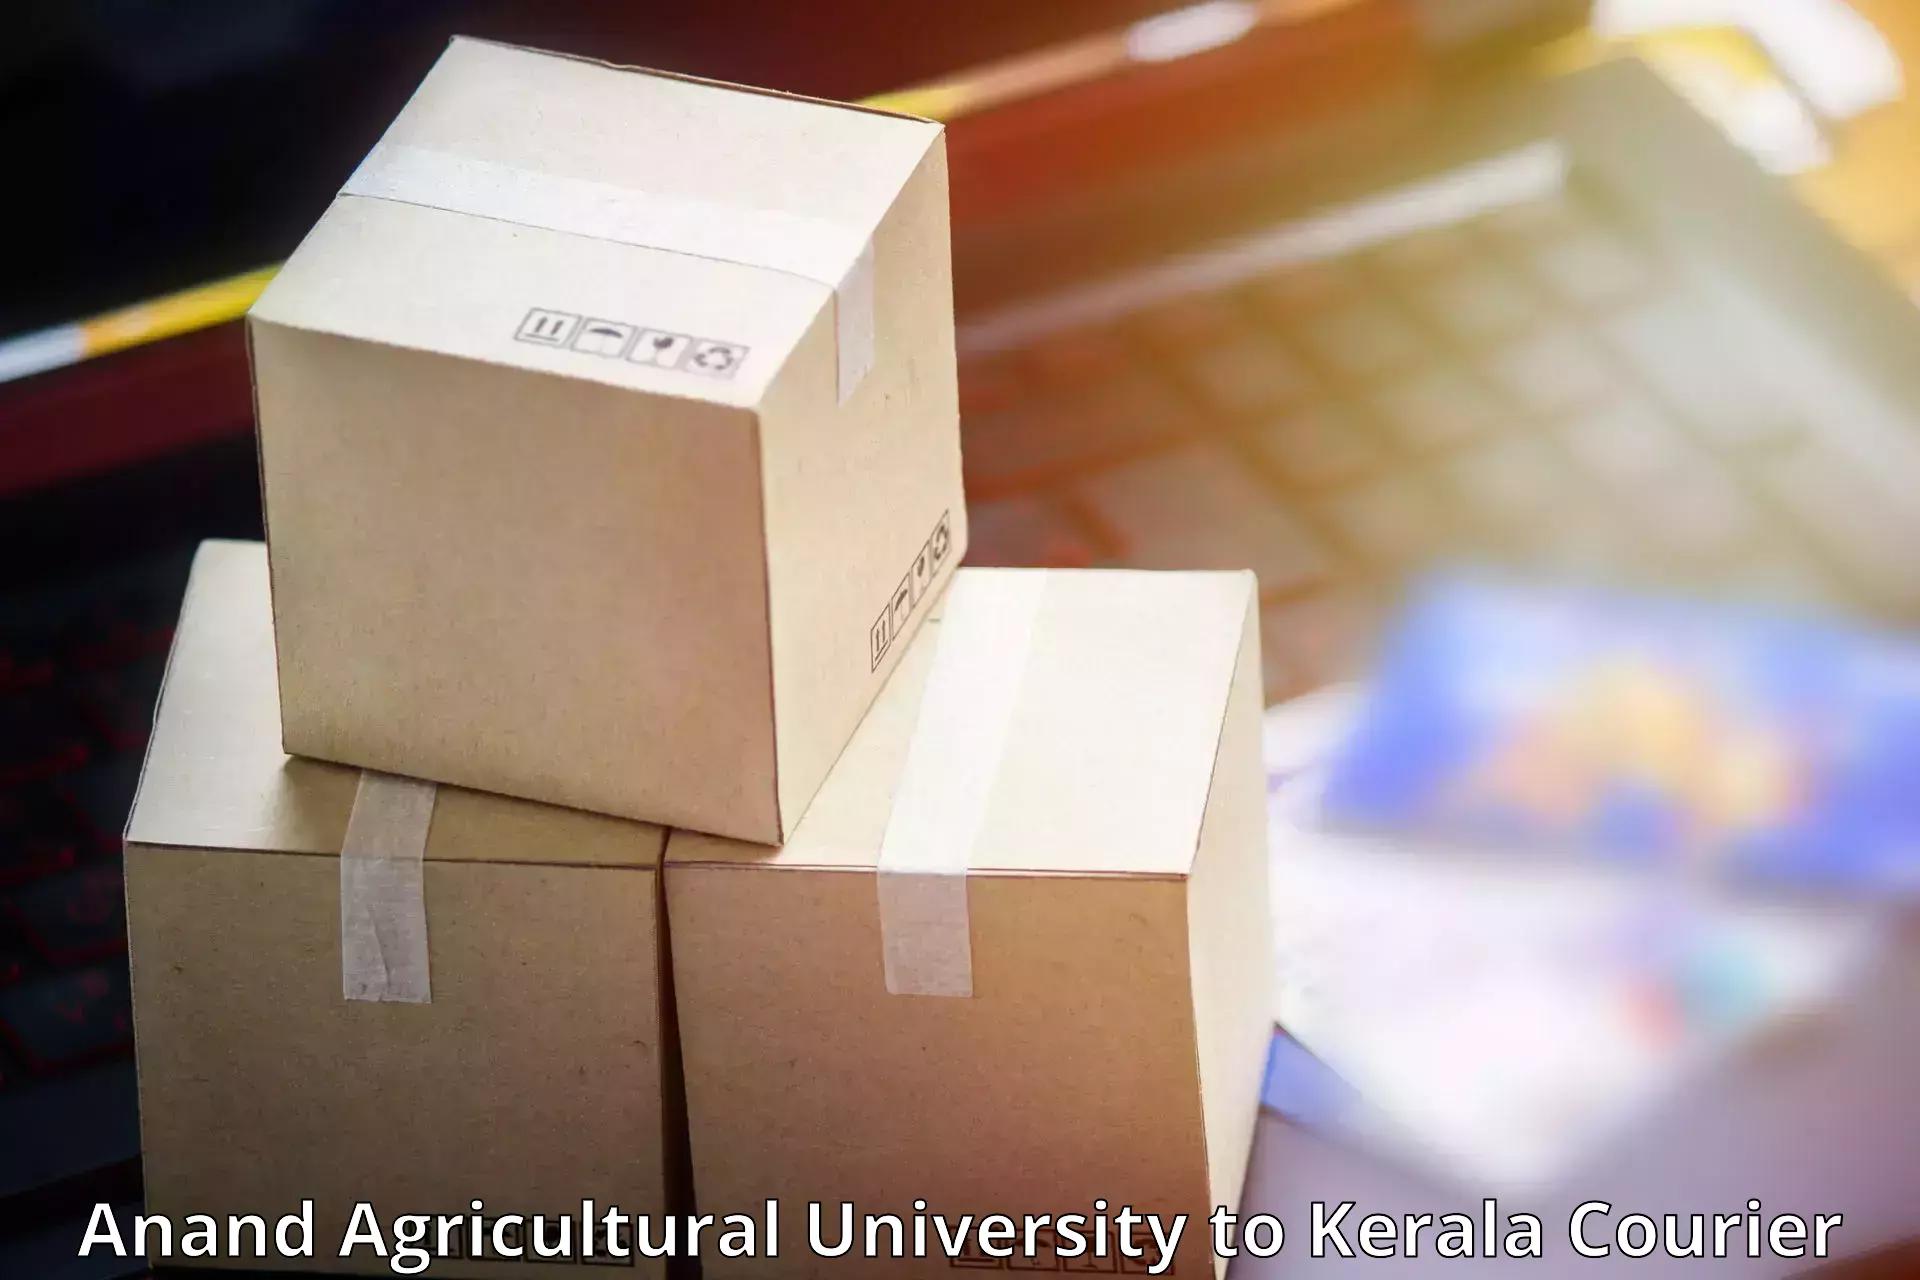 24/7 courier service Anand Agricultural University to Parappa